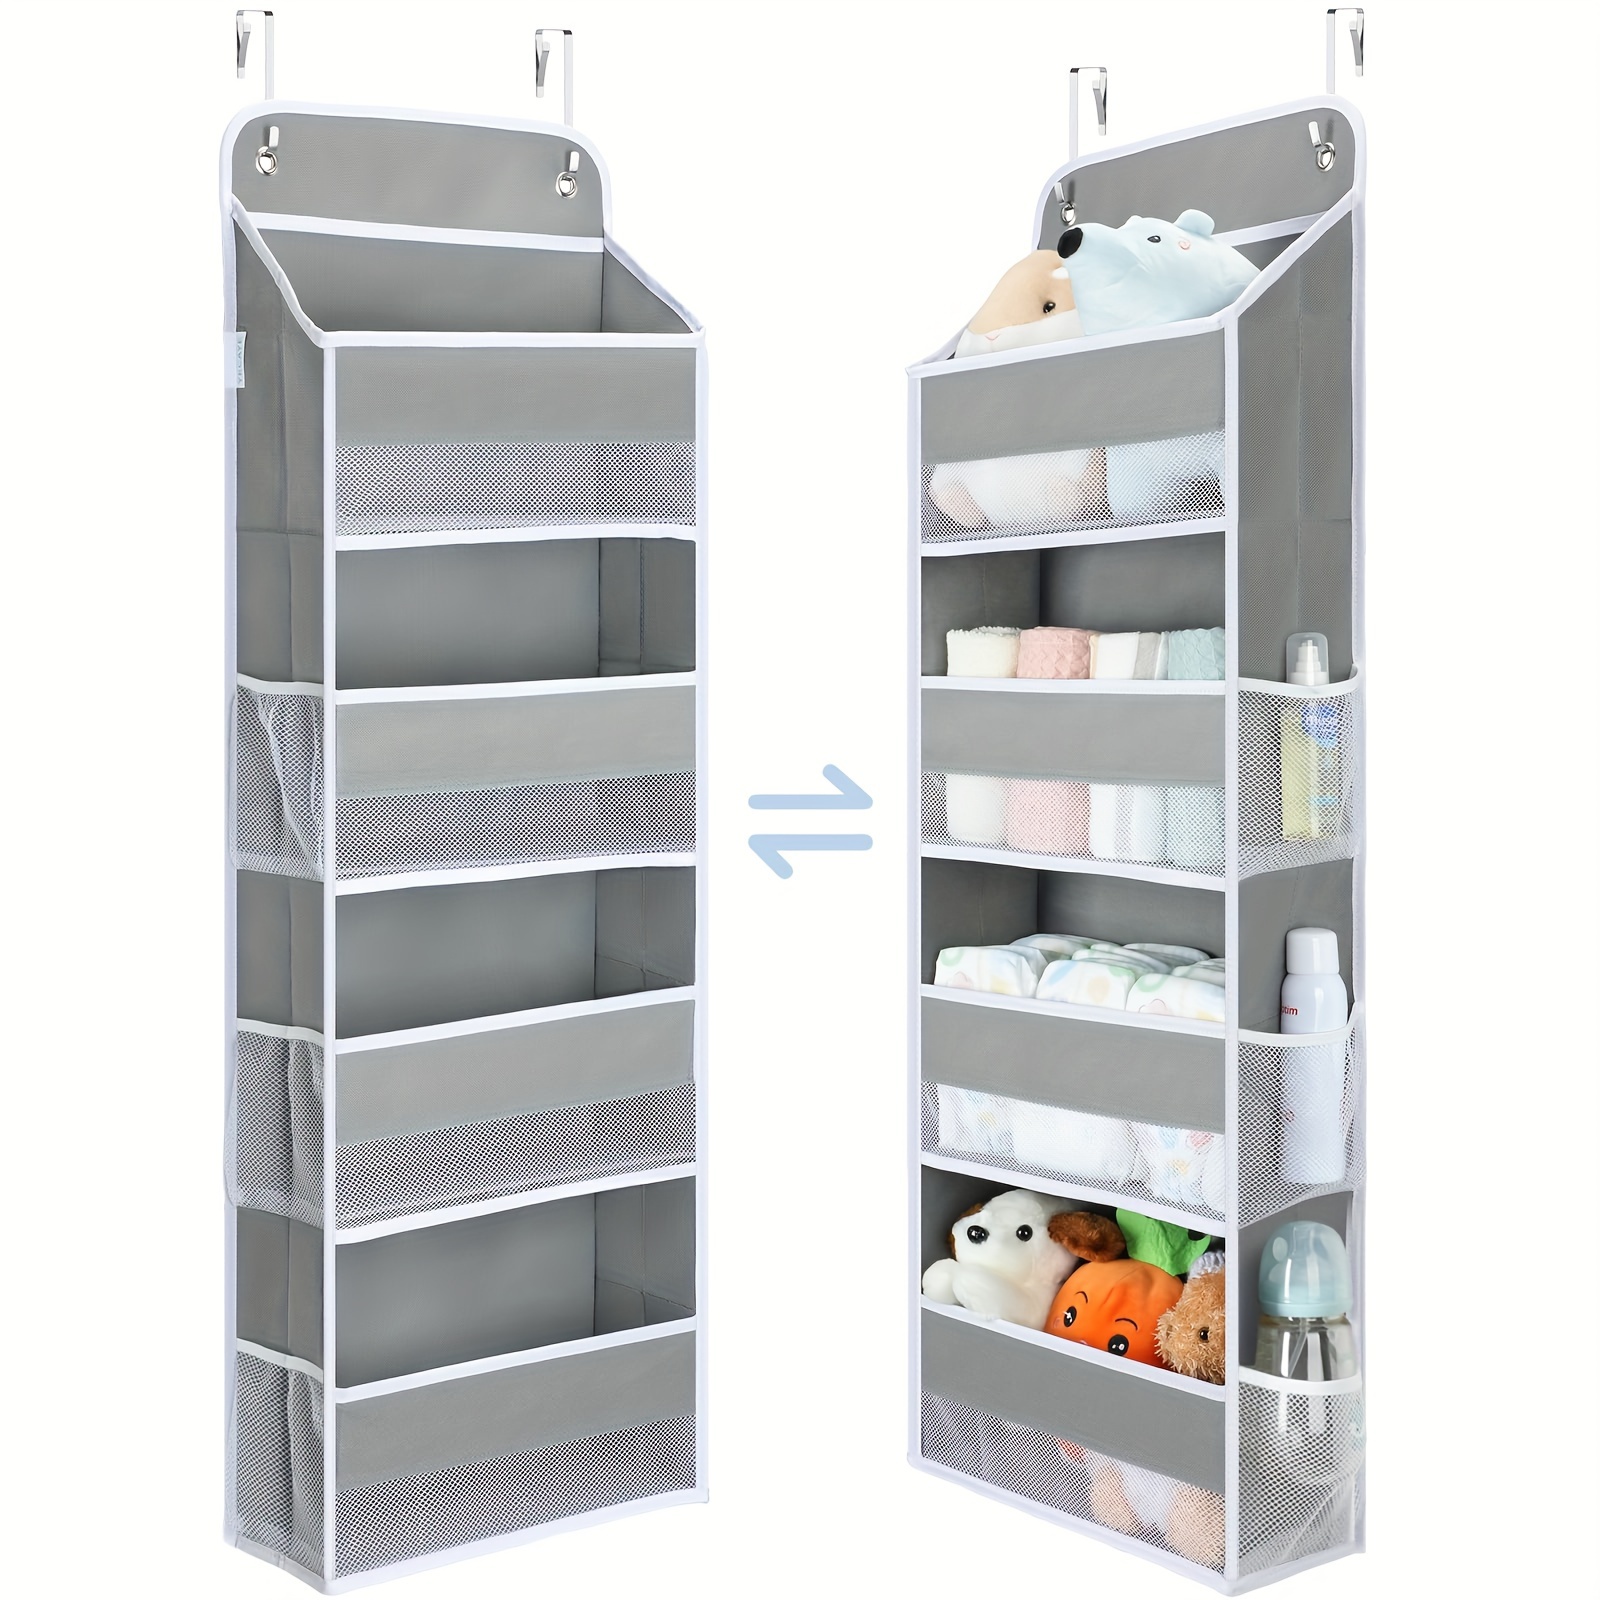 

Over The Door Organizer, 35.2lbs Load Stuffed Animal Storage Hanging, Swing-proof Bathroom Organizers And Storage With 4 Bins 6 Side Pockets For Nursery Newborn Baby Essential Stuff